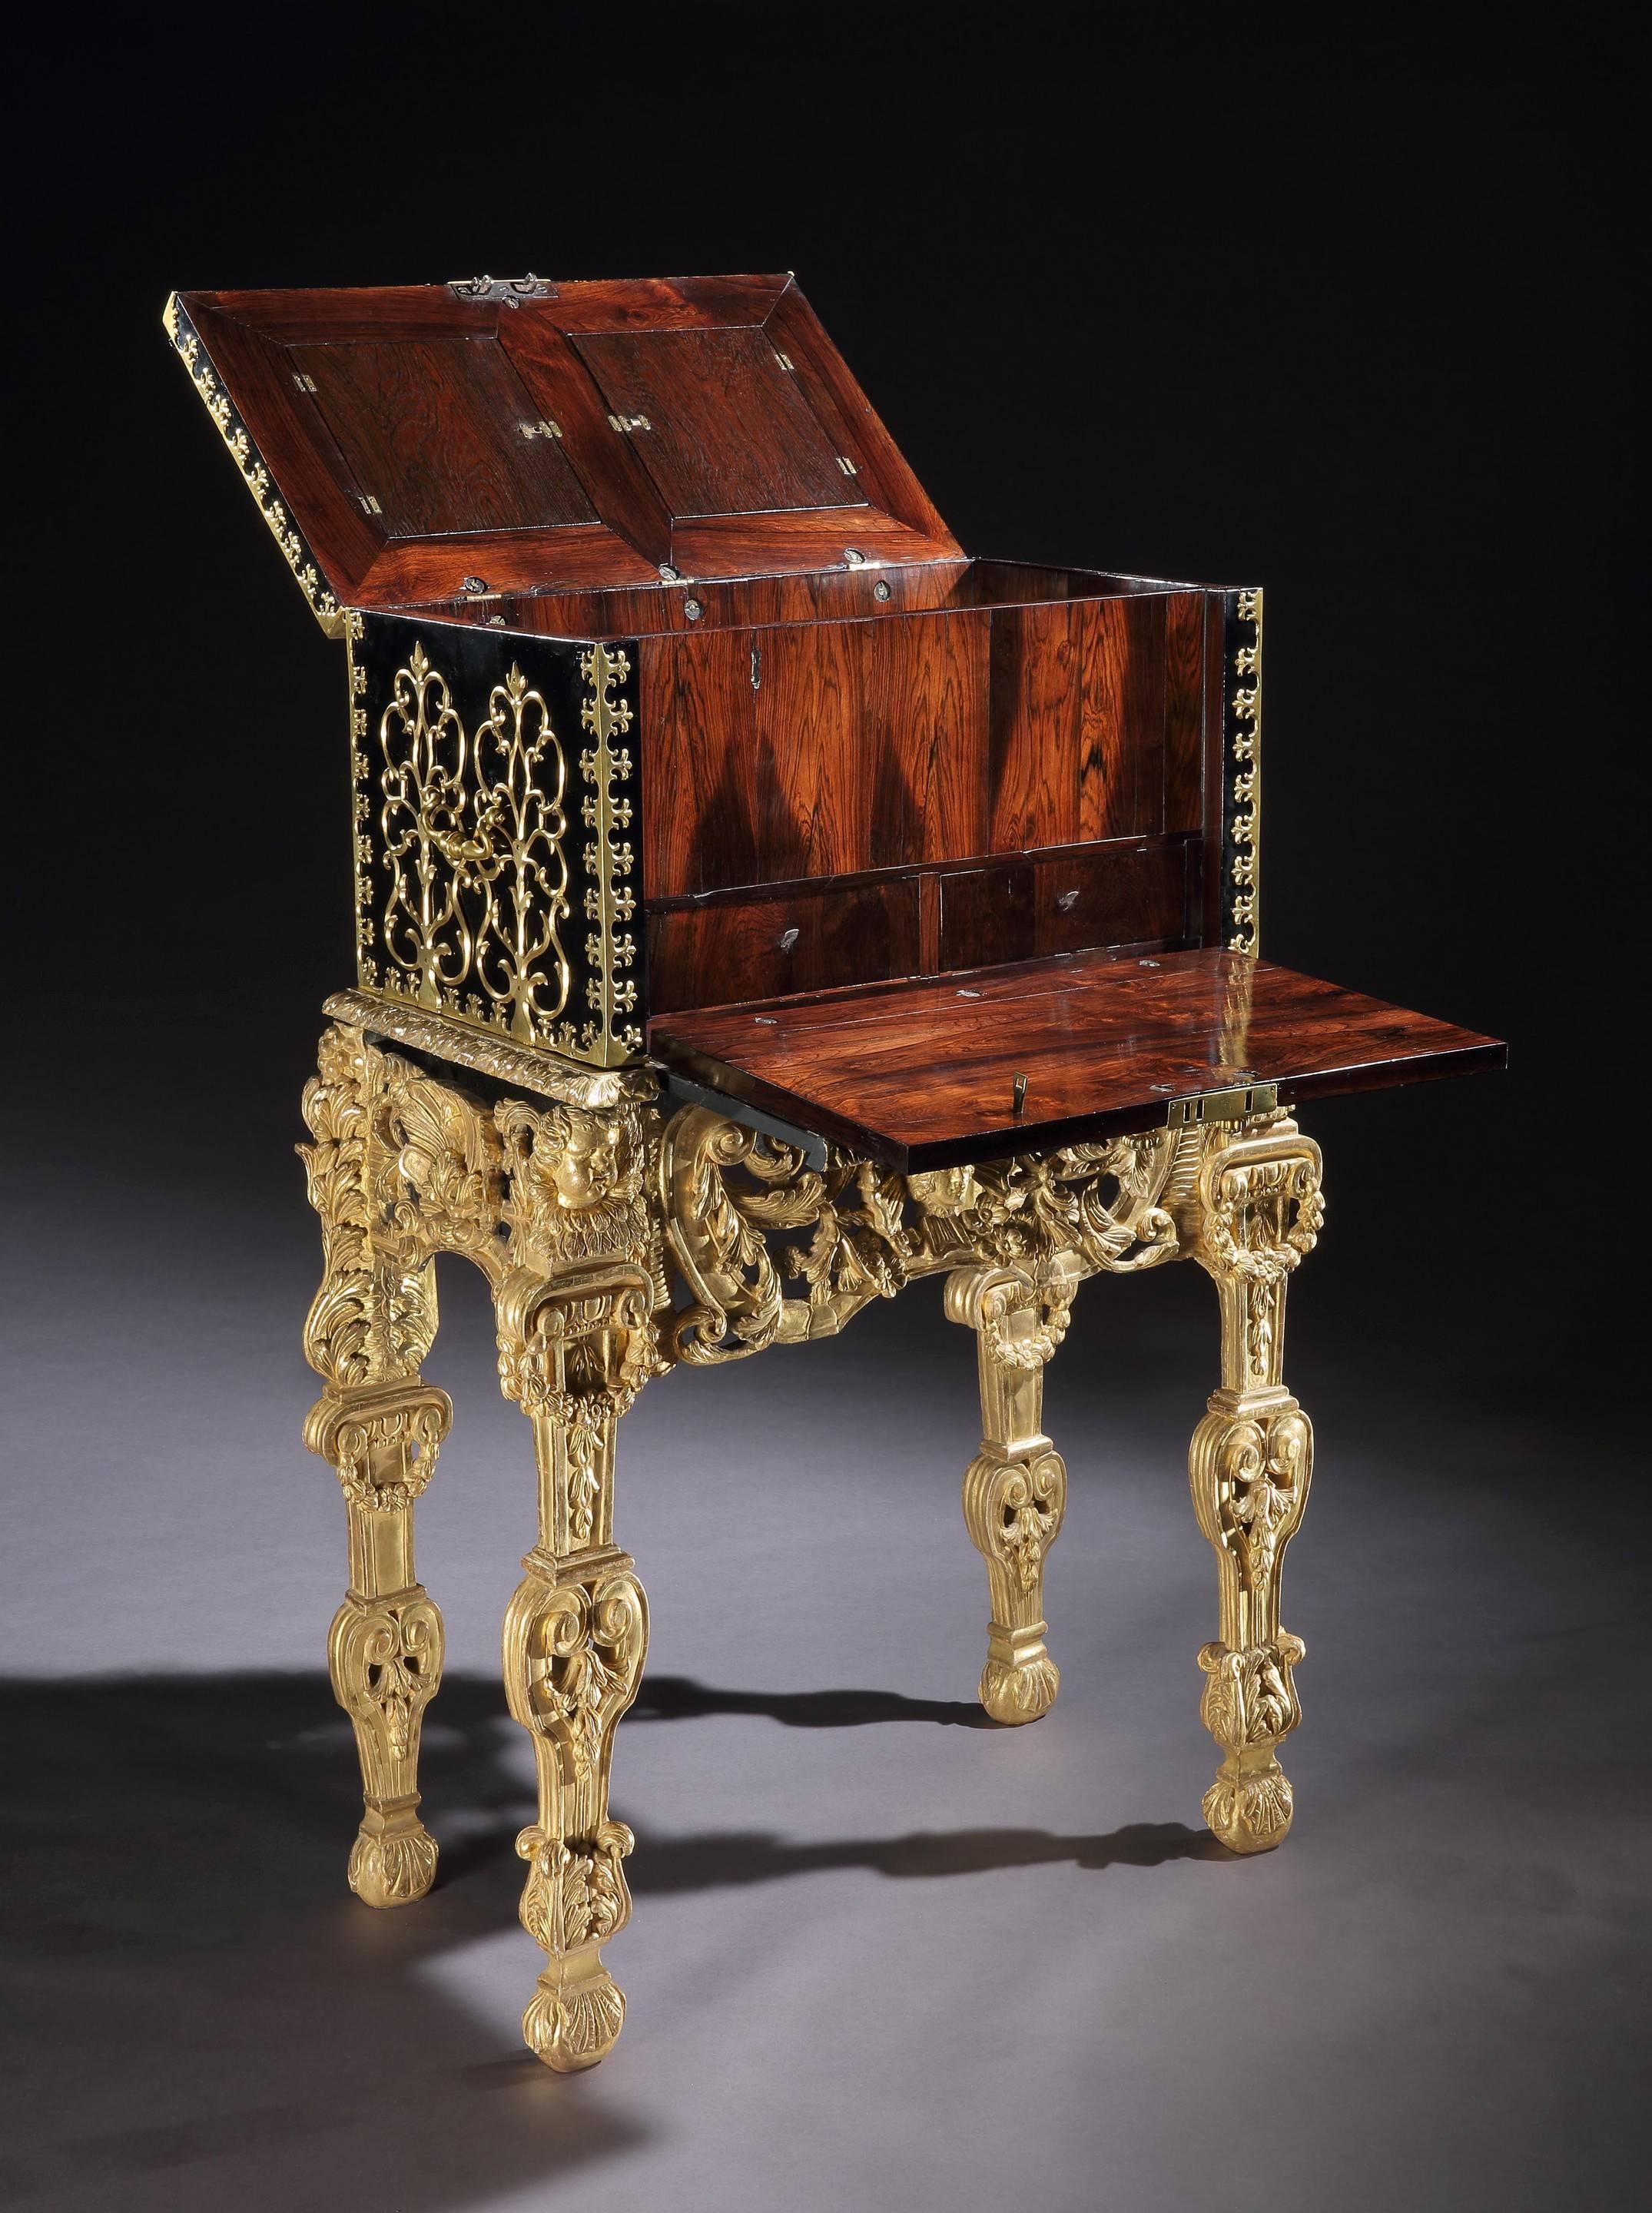 A rare William and Mary brass bound ebonised strong box on giltwood stand. (4409821). 

The stand is original to the strong box and has concealed lopers to the front, which support the fold-down front of the box. The interior of the strong box